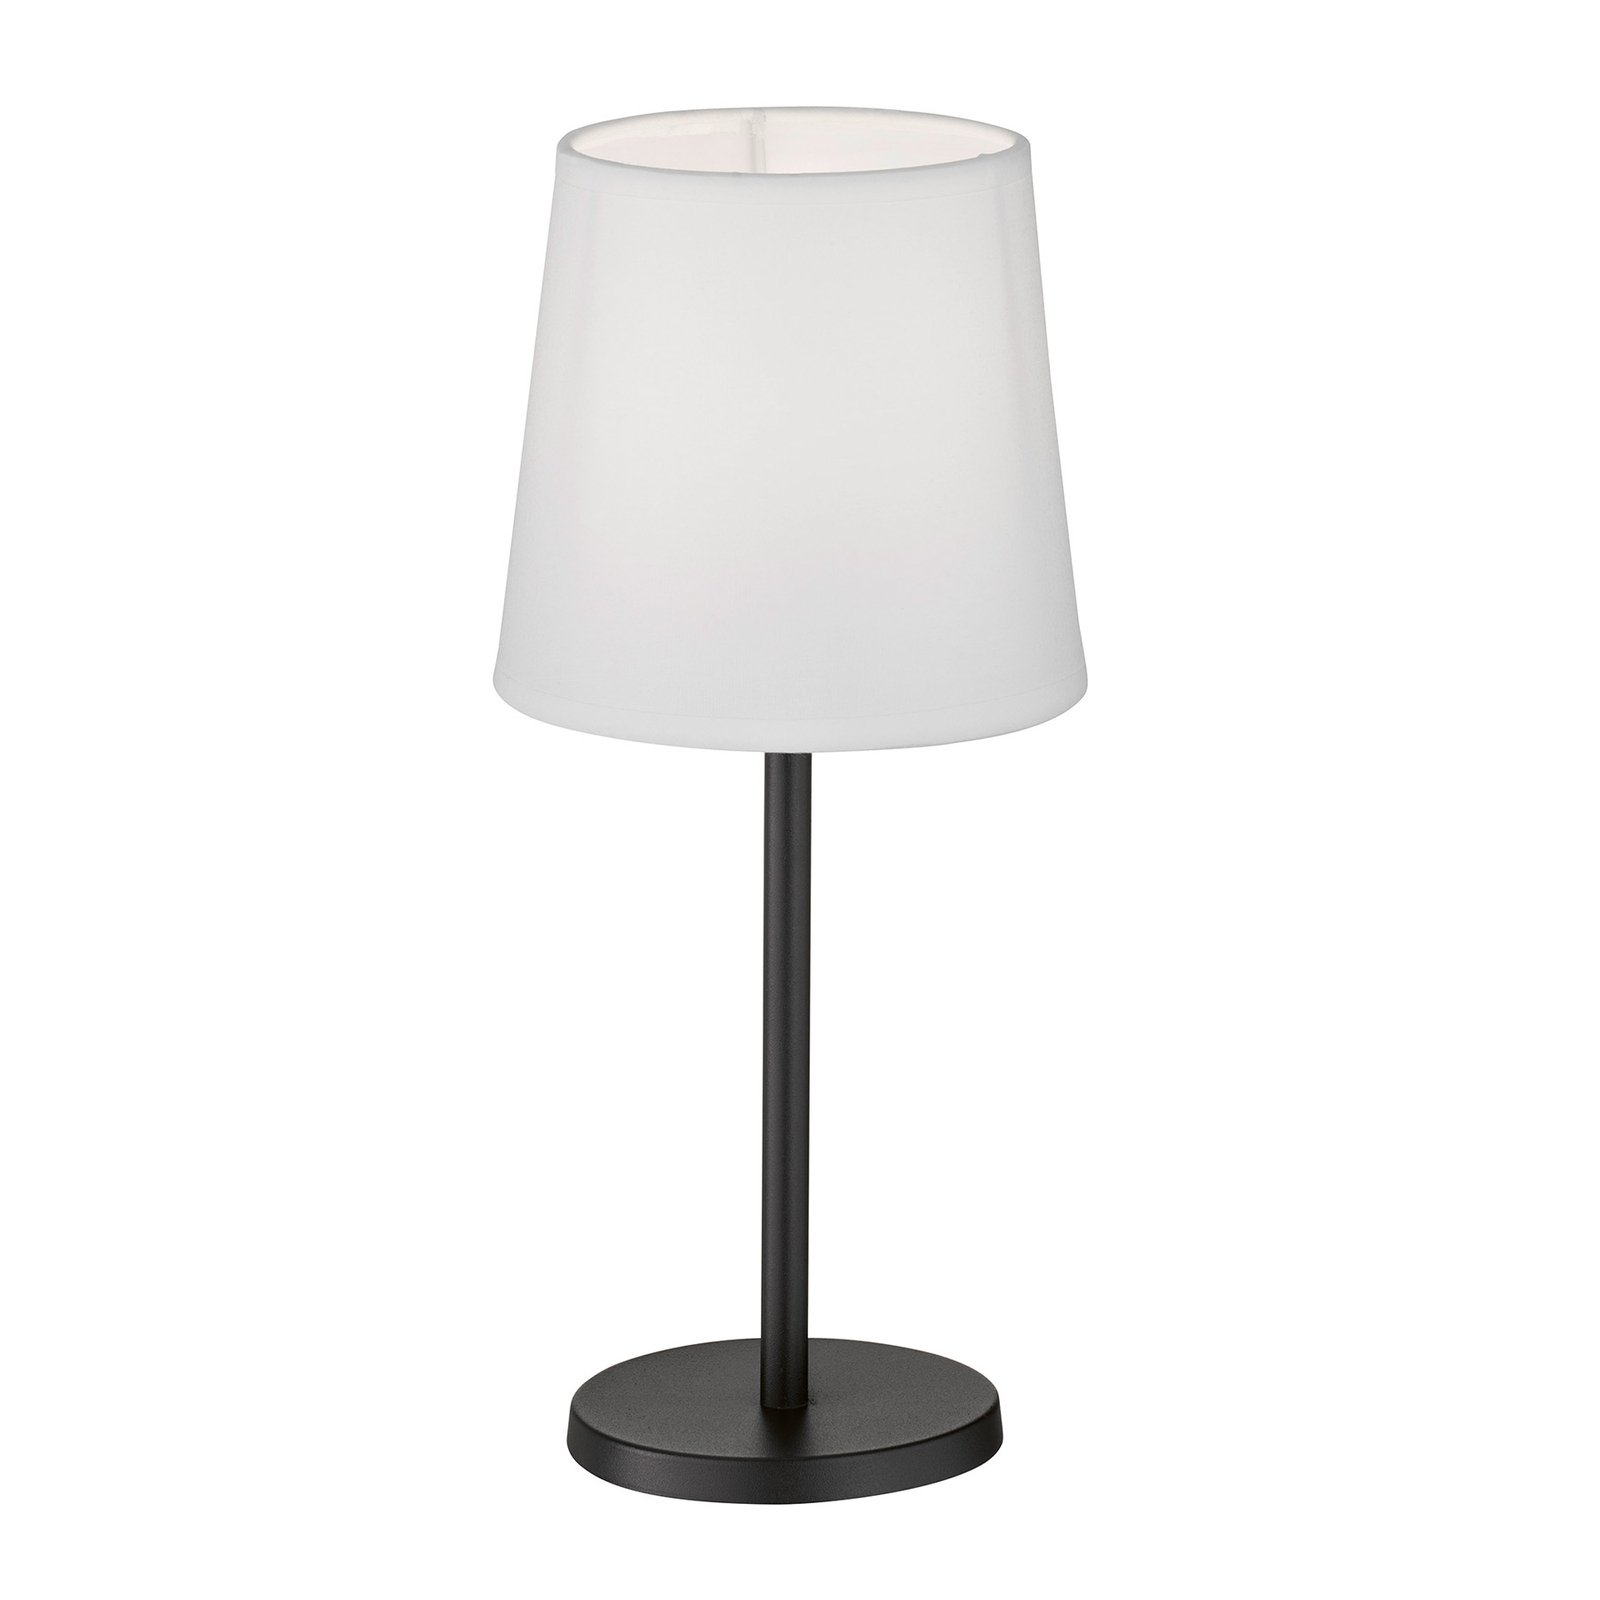 Eve table lamp, fabric lampshade, black/white